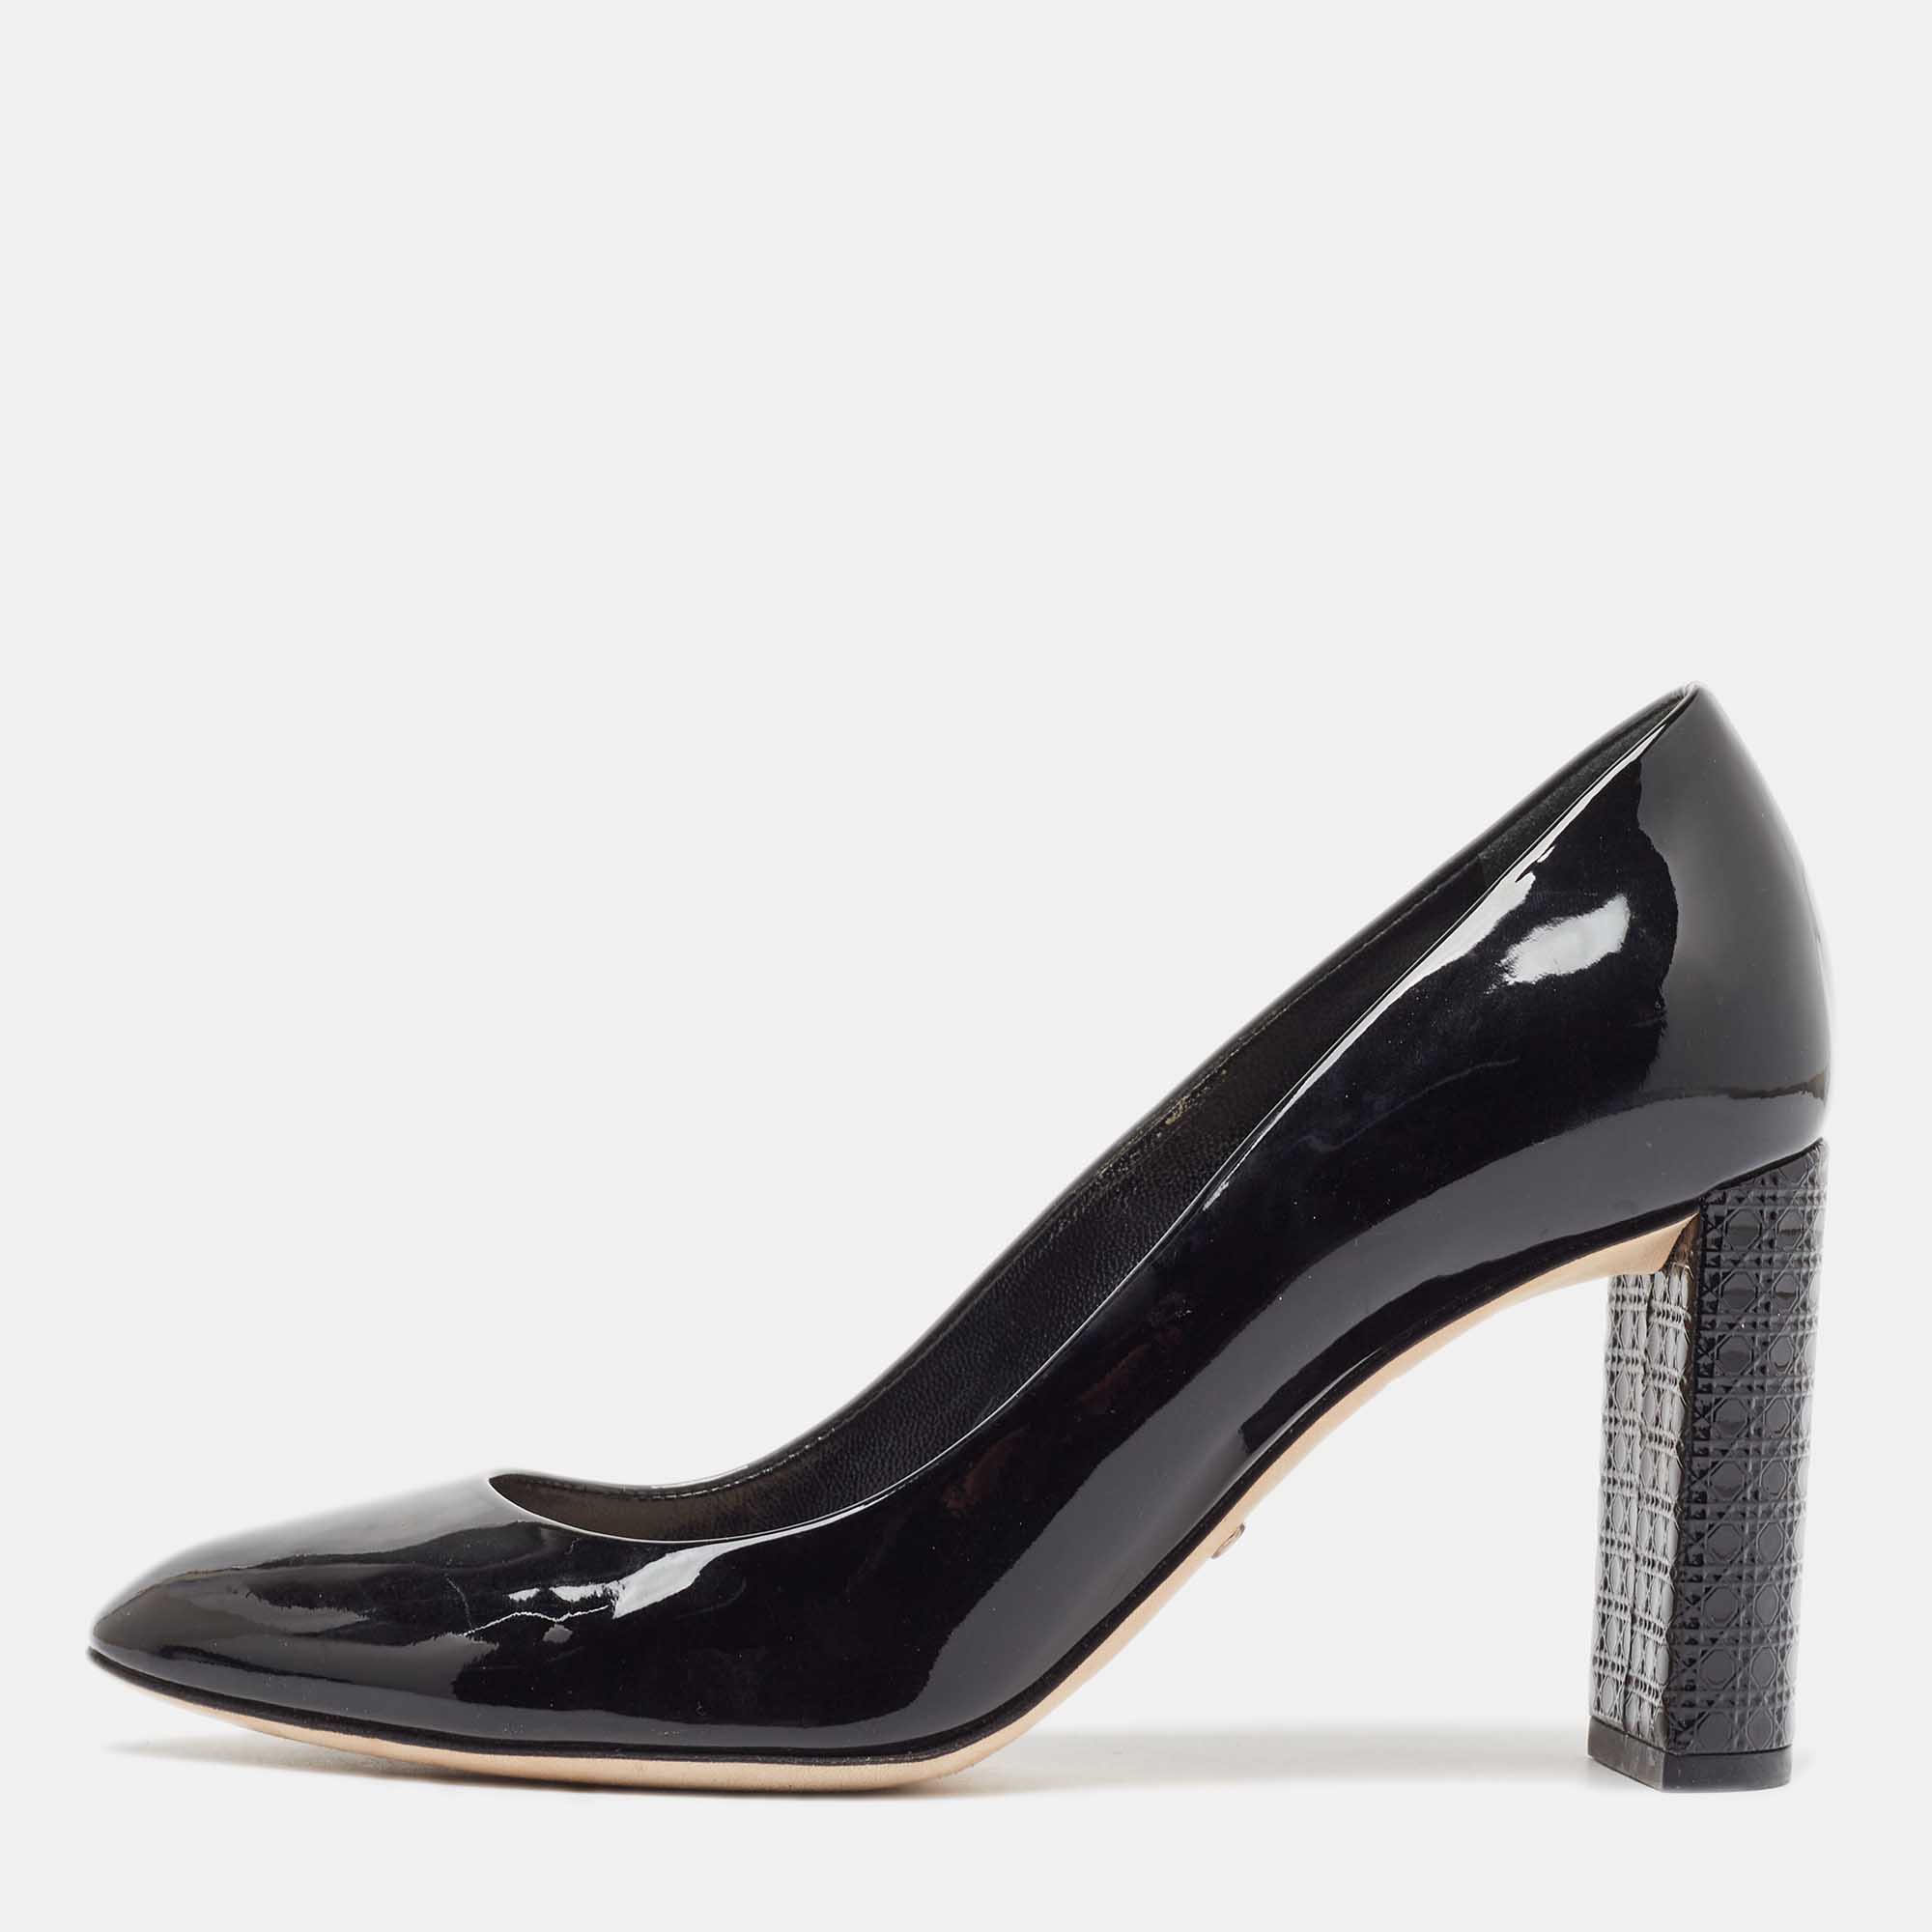 Dior black patent leather cannage block heel pumps size 37.5